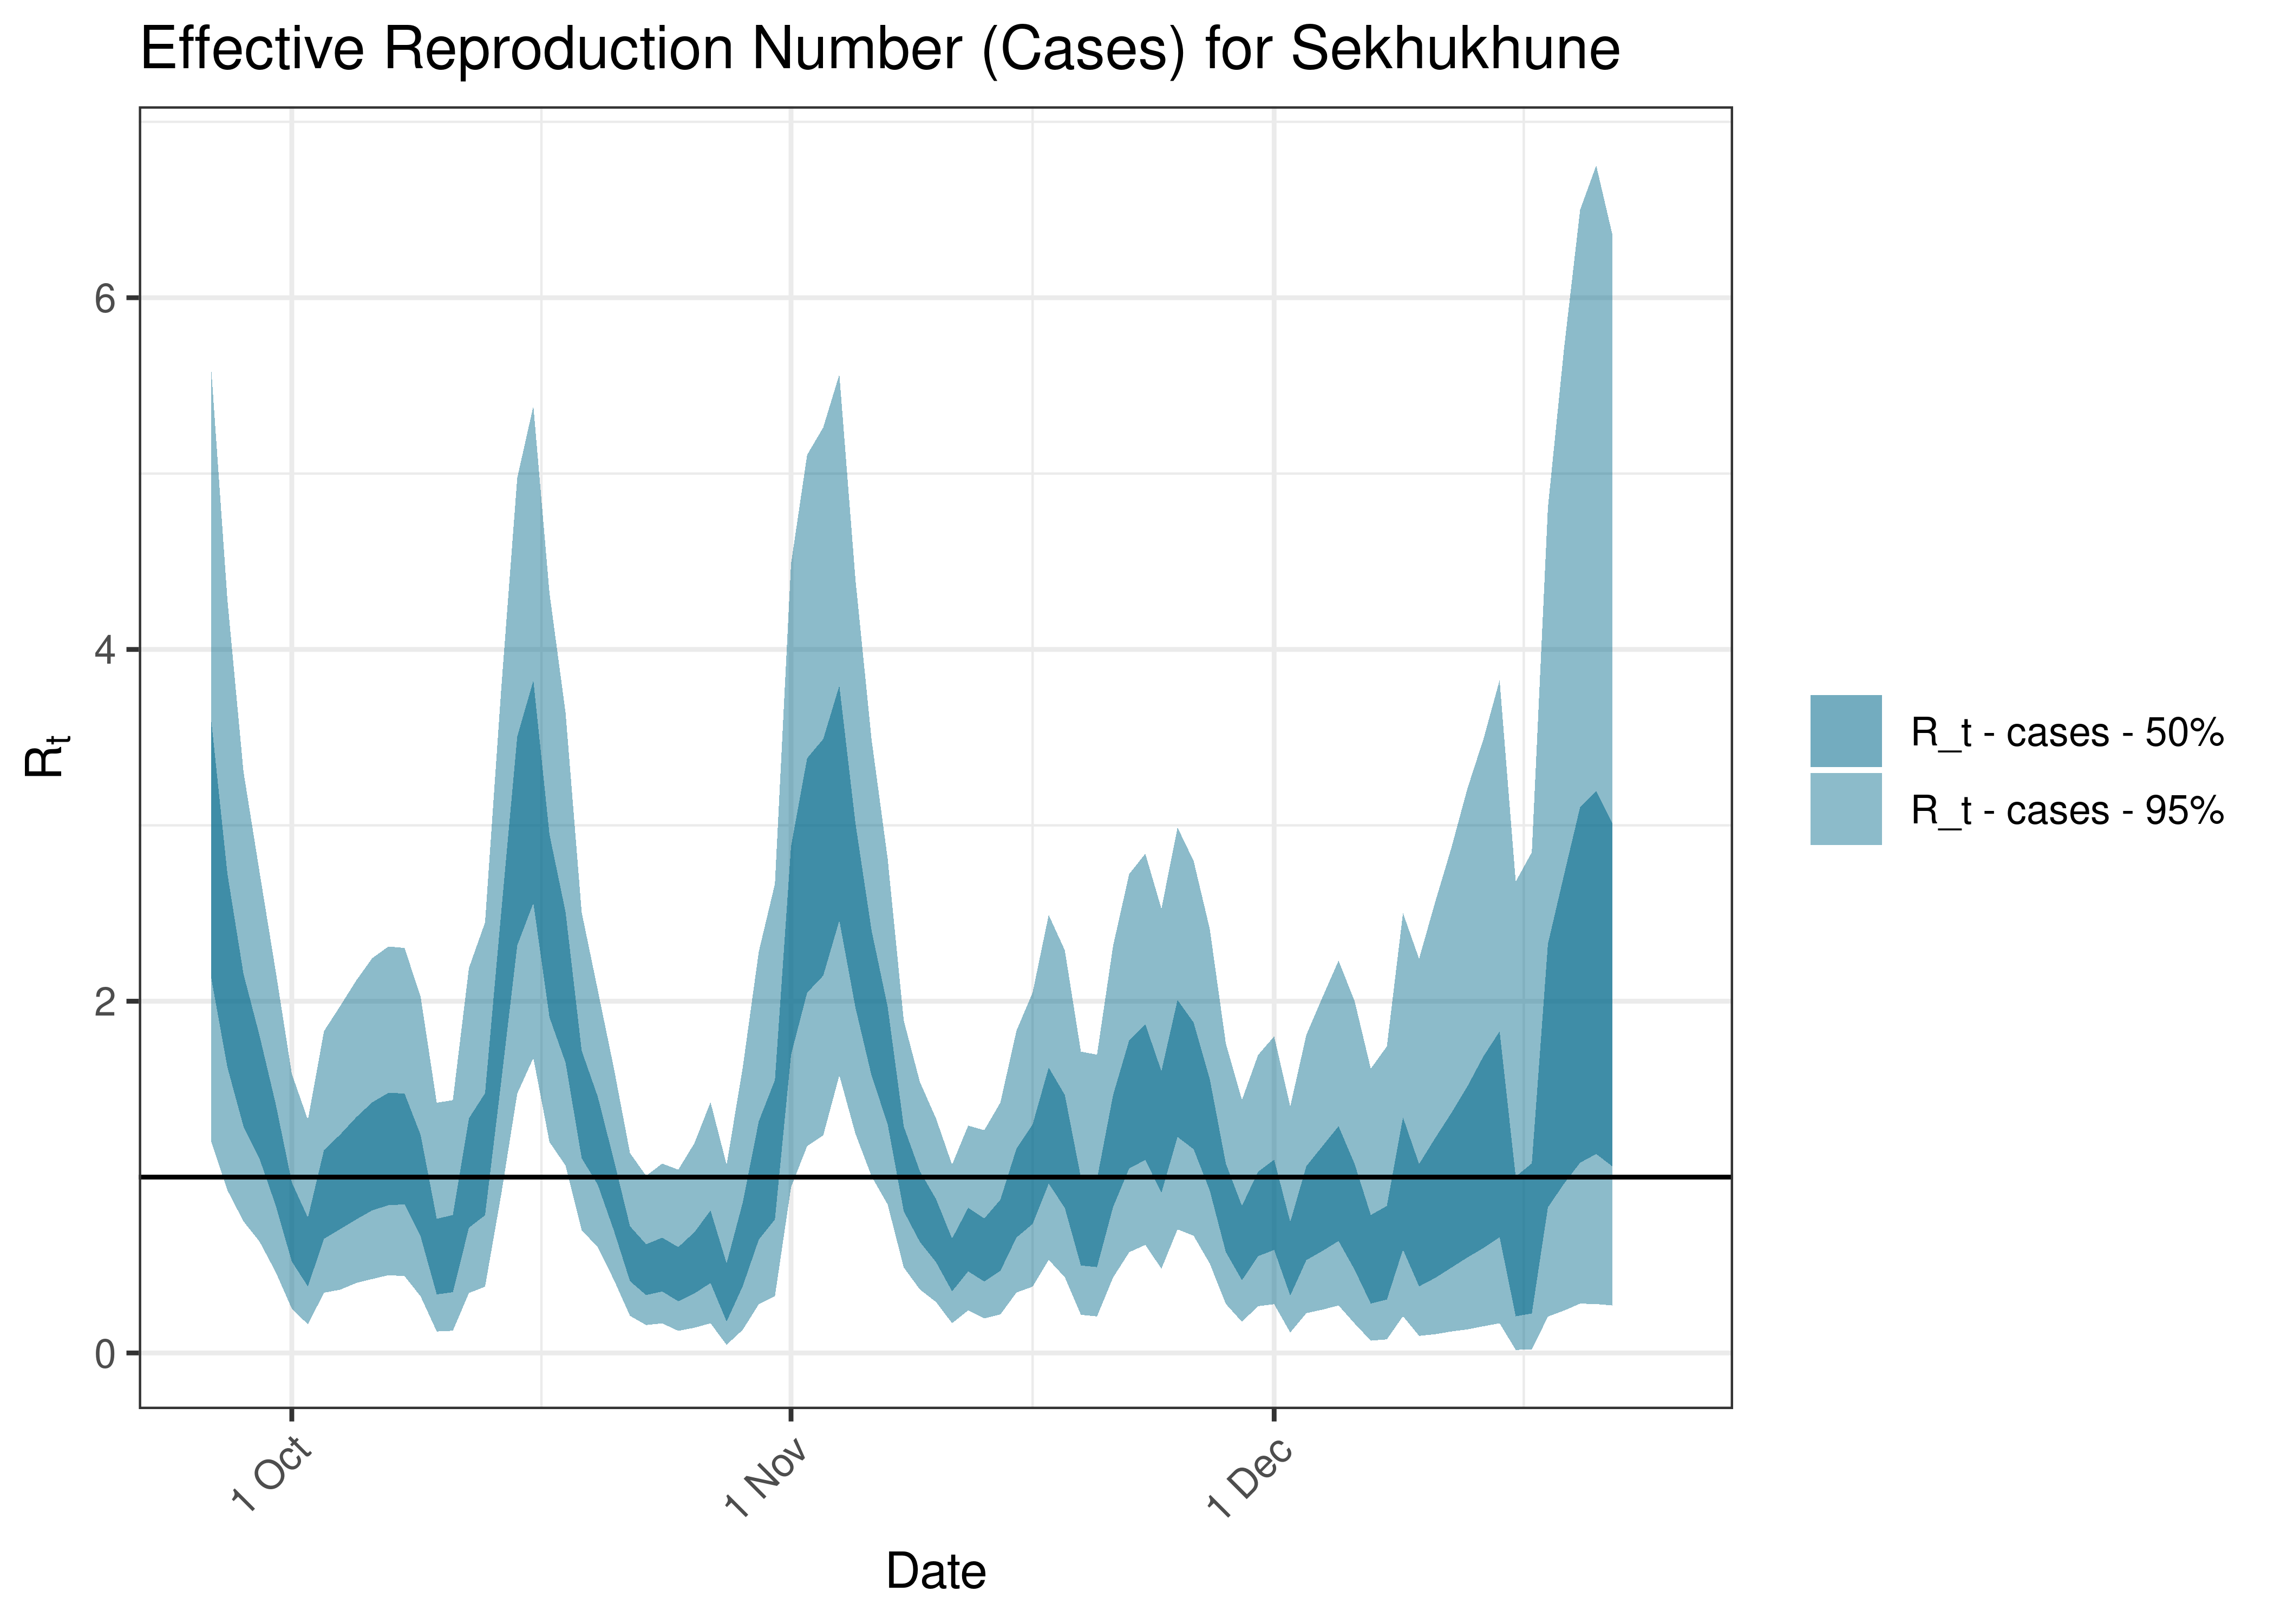 Estimated Effective Reproduction Number Based on Cases for Sekhukhune over last 90 days